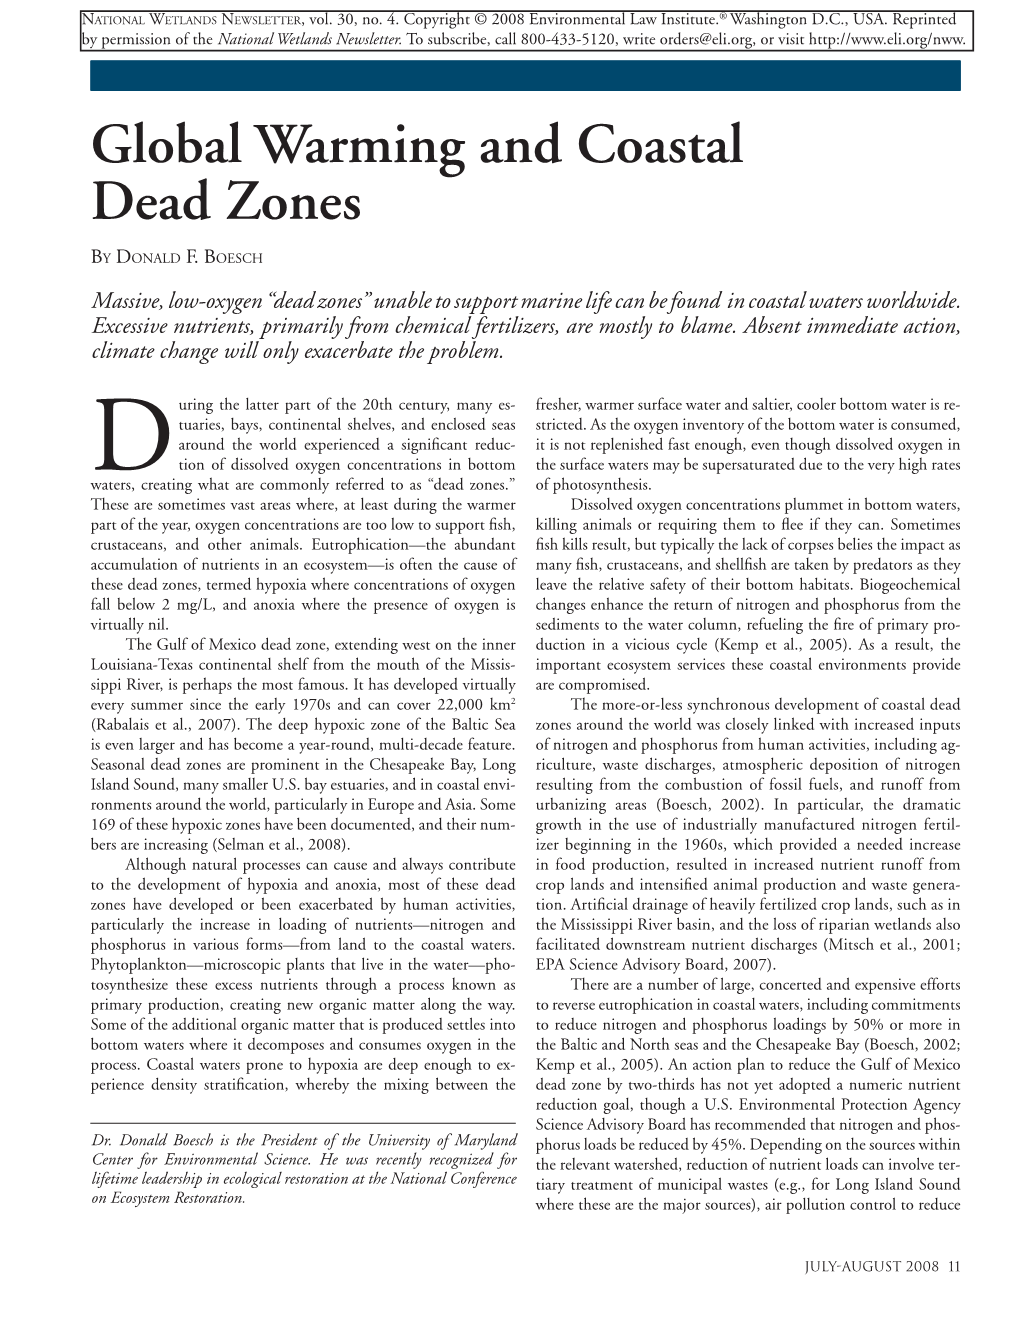 Global Warming and Coastal Dead Zones